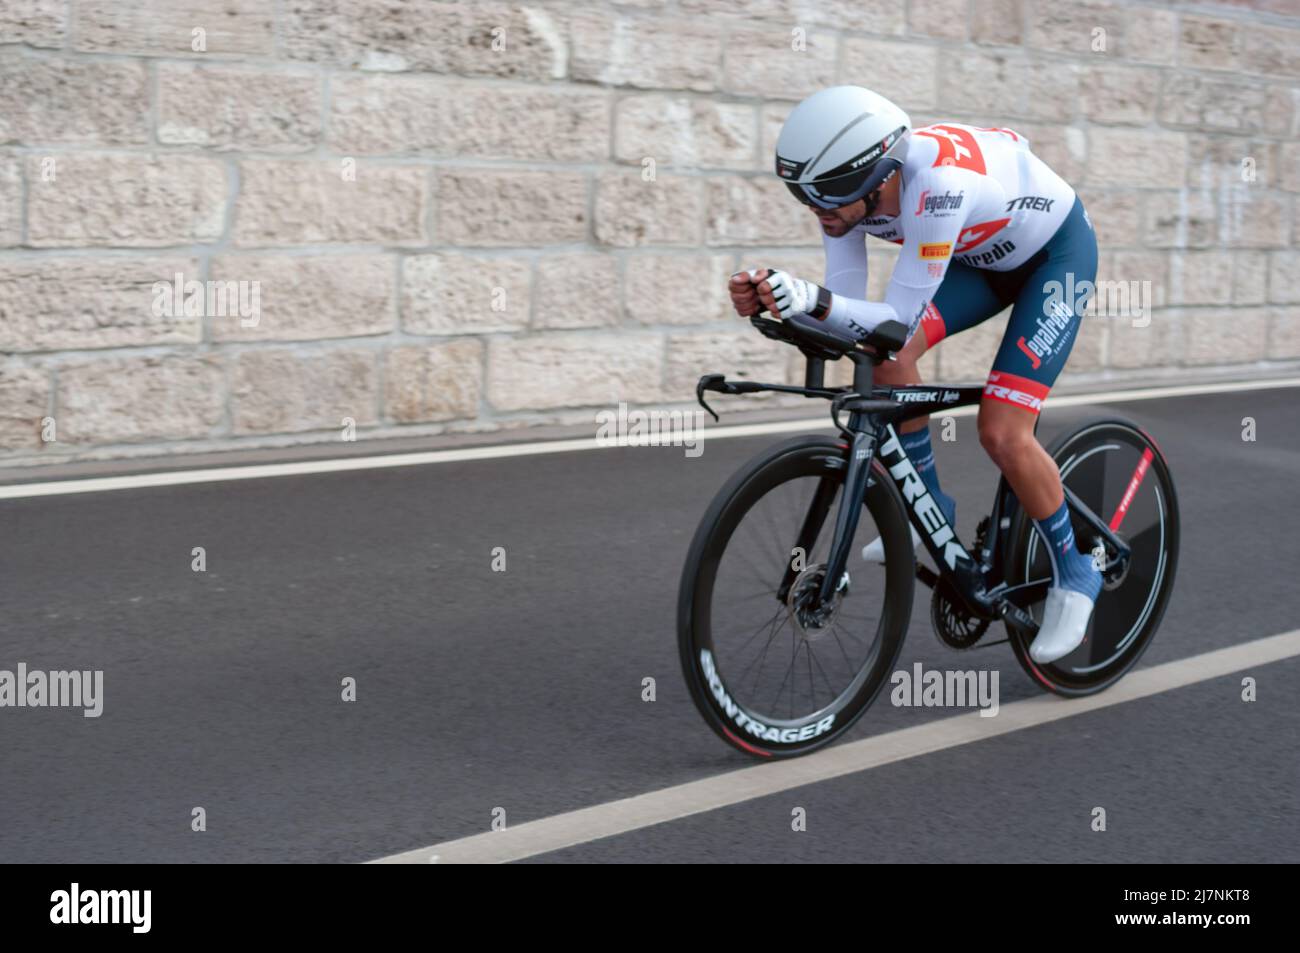 BUDAPEST, HUNGARY - MAY 07, 2022: Pro cyclist Jacopo Mosca TREK - SEGAFREDO, Giro D'Italia Stage 2 Time trial - cycling competition on May 07, 2022 in Stock Photo